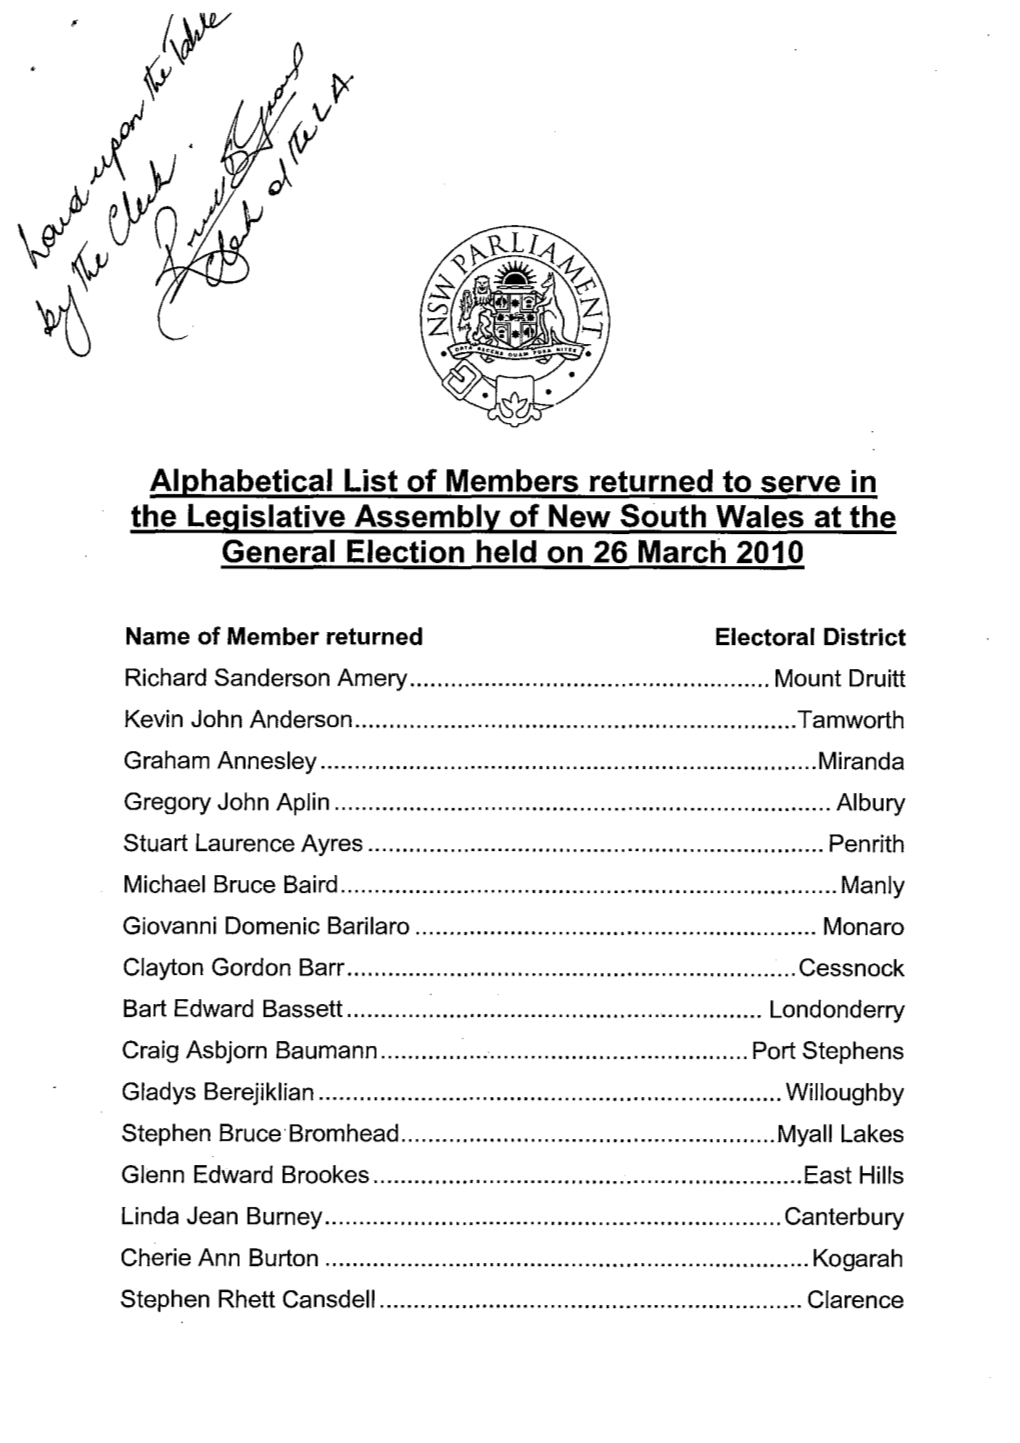 Alphabetical List of Members Returned to Serve in the Legislative Assembly of New South Wales at the General Election Held on 26 March 2010